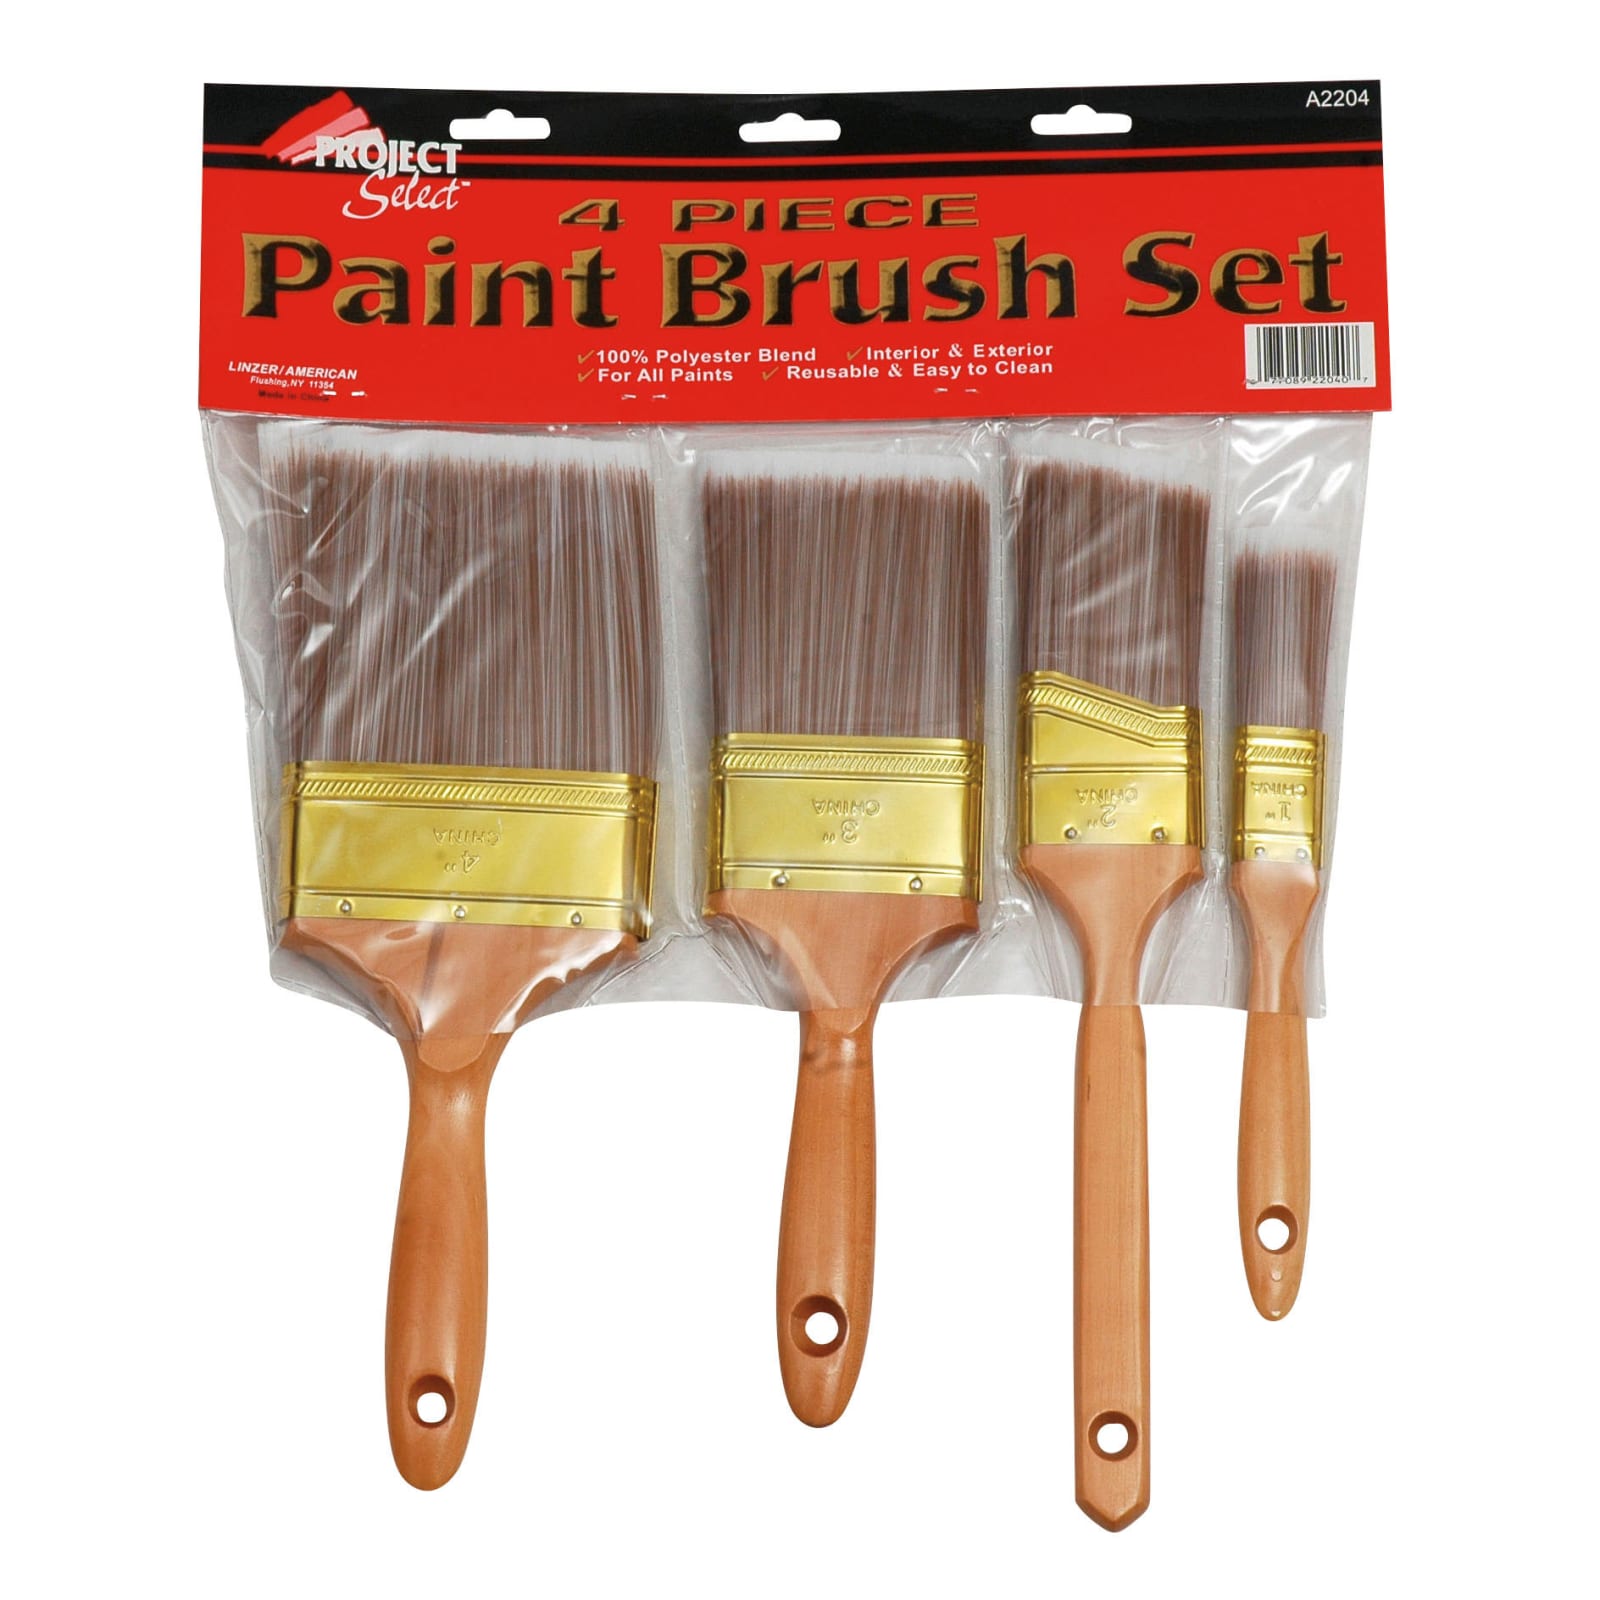 Polyester Paint Brush Set - 4 Pc by Project Select at Fleet Farm